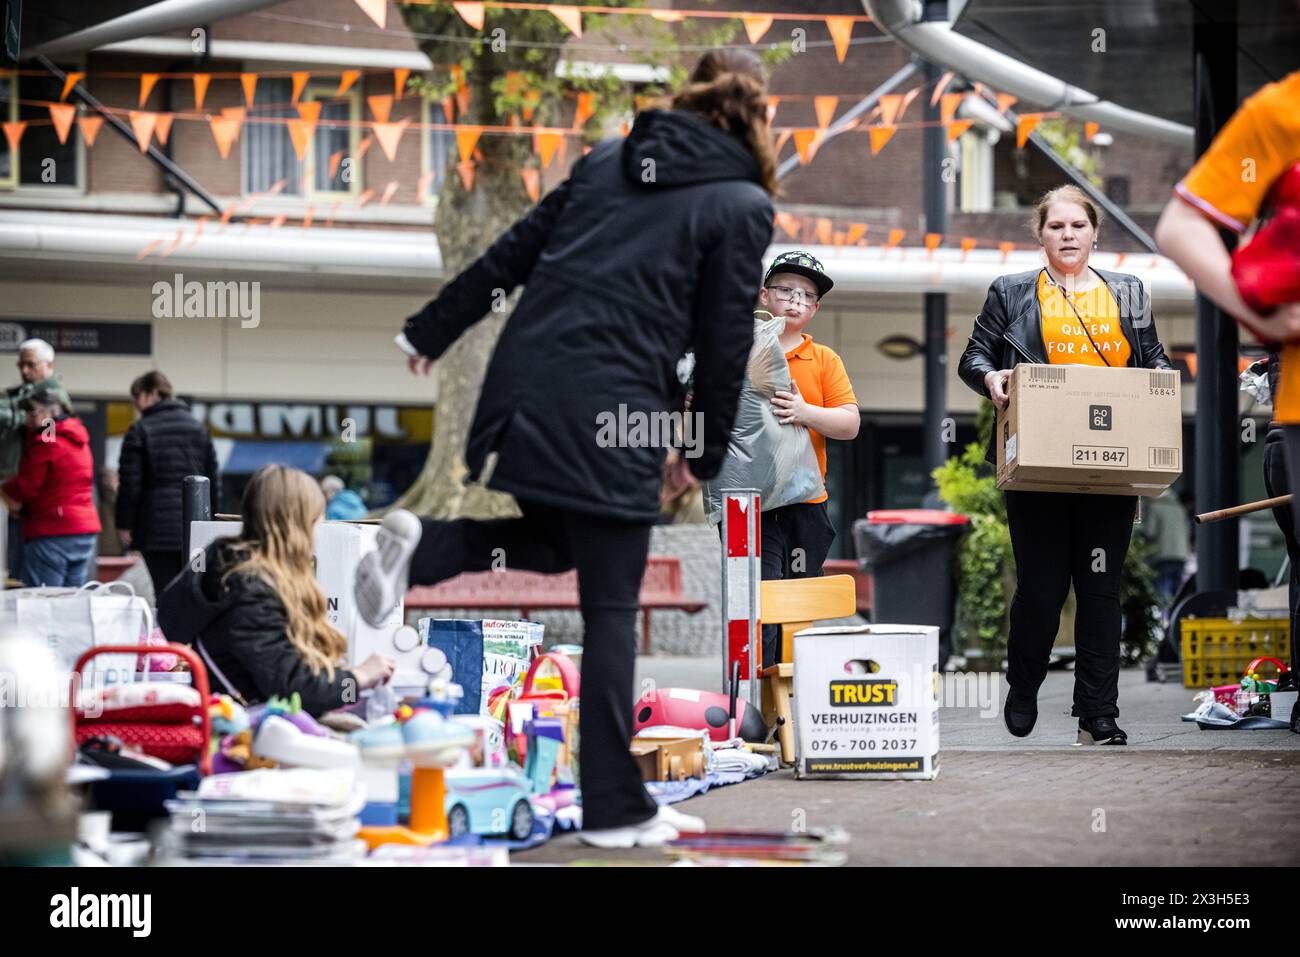 VELDHOVEN - People prepare for the flea market during the celebration of King's Day. While the royal family visited Emmen, the national holiday was also fully celebrated in the rest of the country. ANP ROB ENGELAAR netherlands out - belgium out Stock Photo